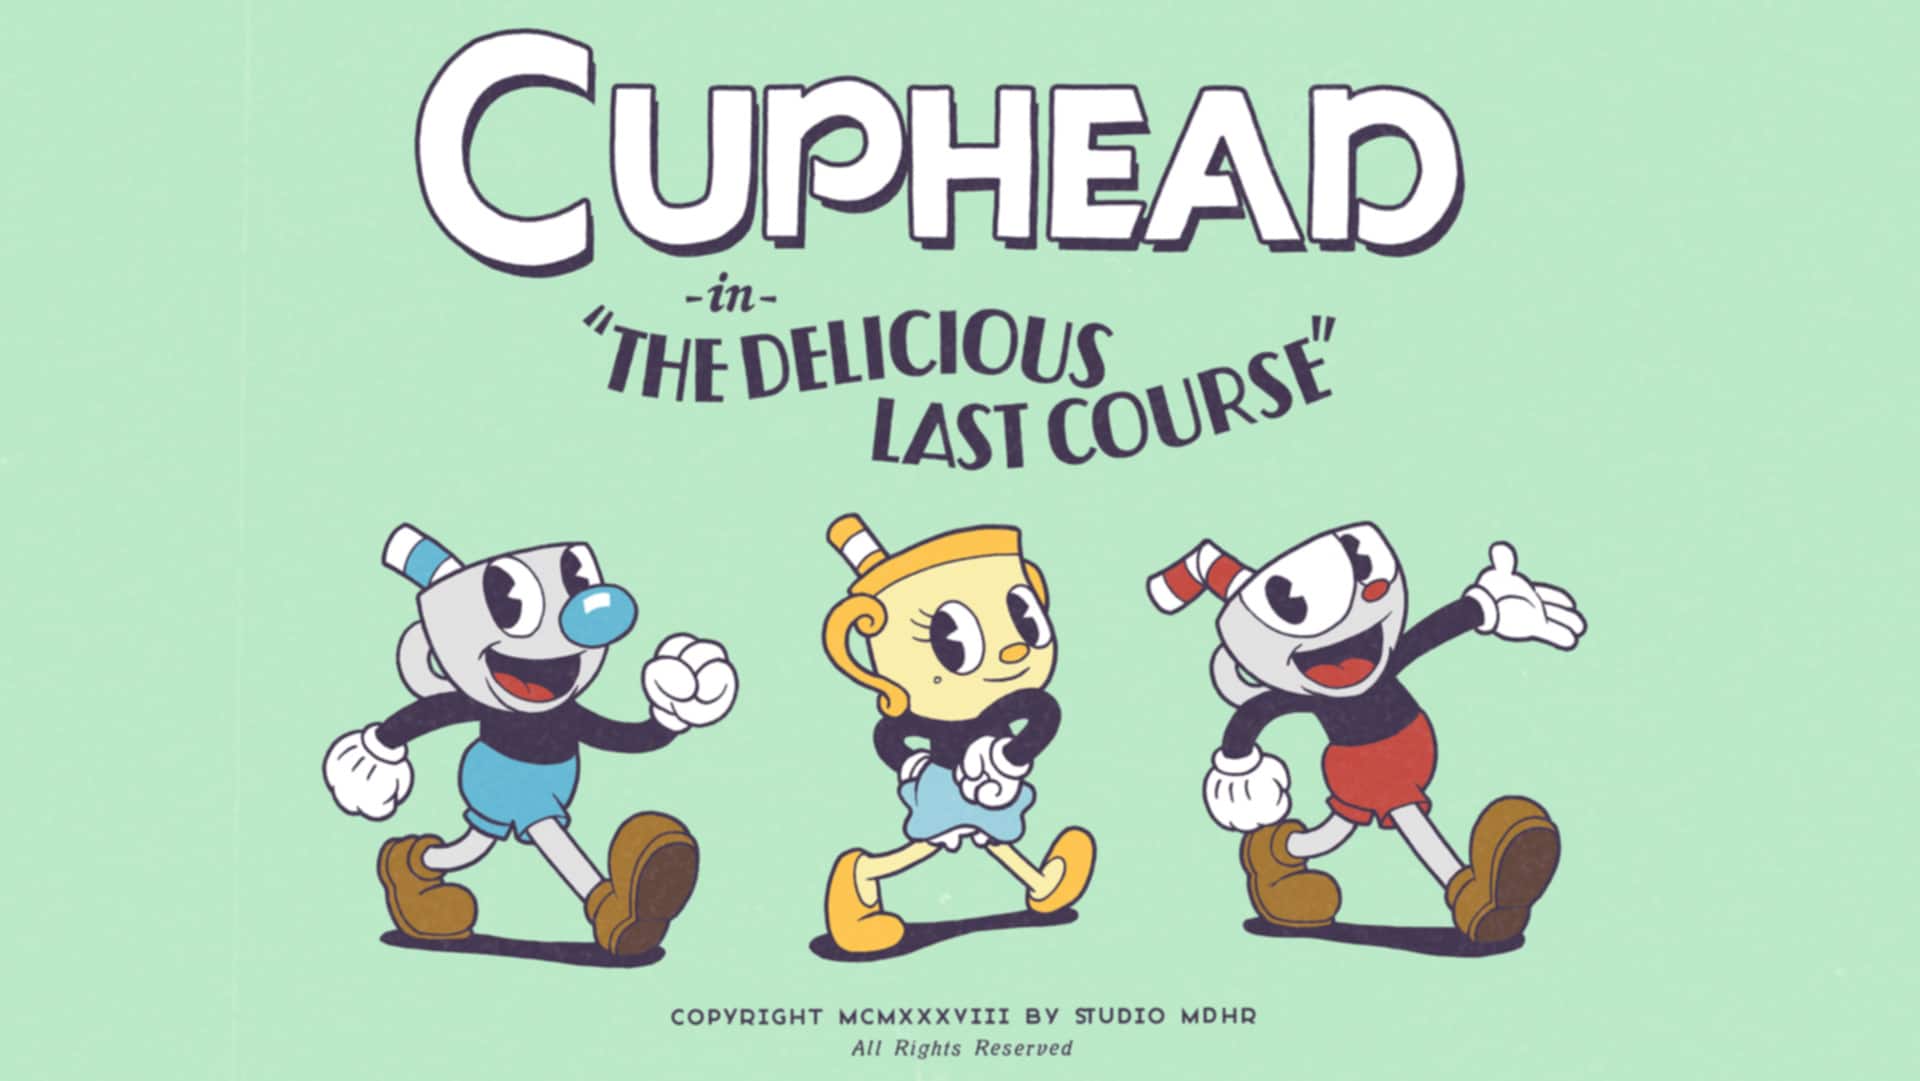 Cuphead: The Delicious Last Course - GamersRD